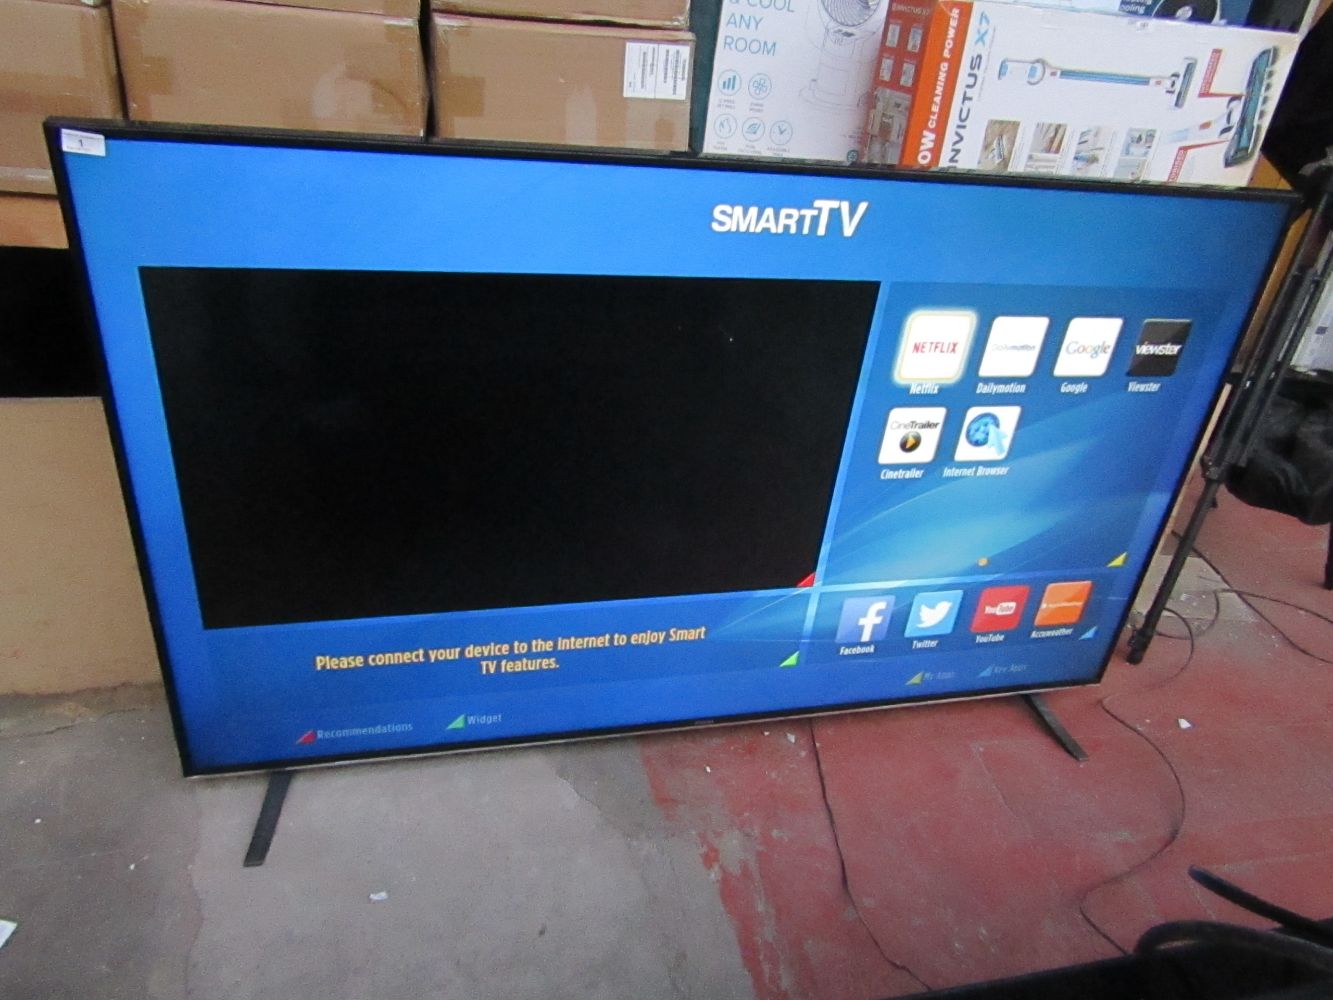 New delivery of TV's, Refurbished kitchen electricals, Fitness equipment, Sound Bars and More